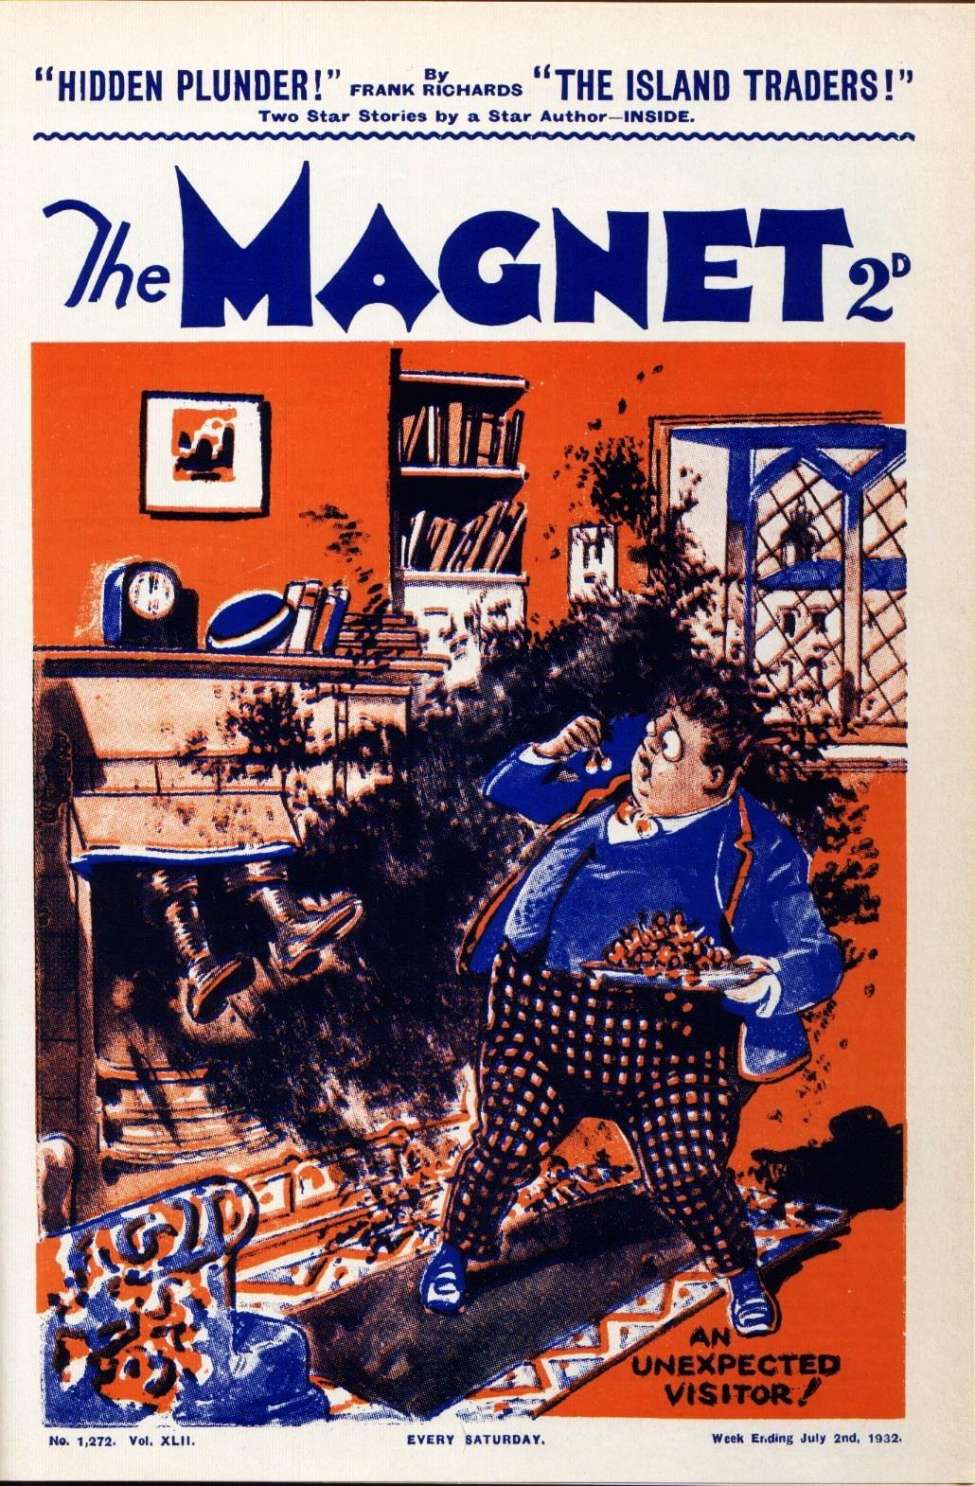 Book Cover For The Magnet 1272 - Hidden Plunder!